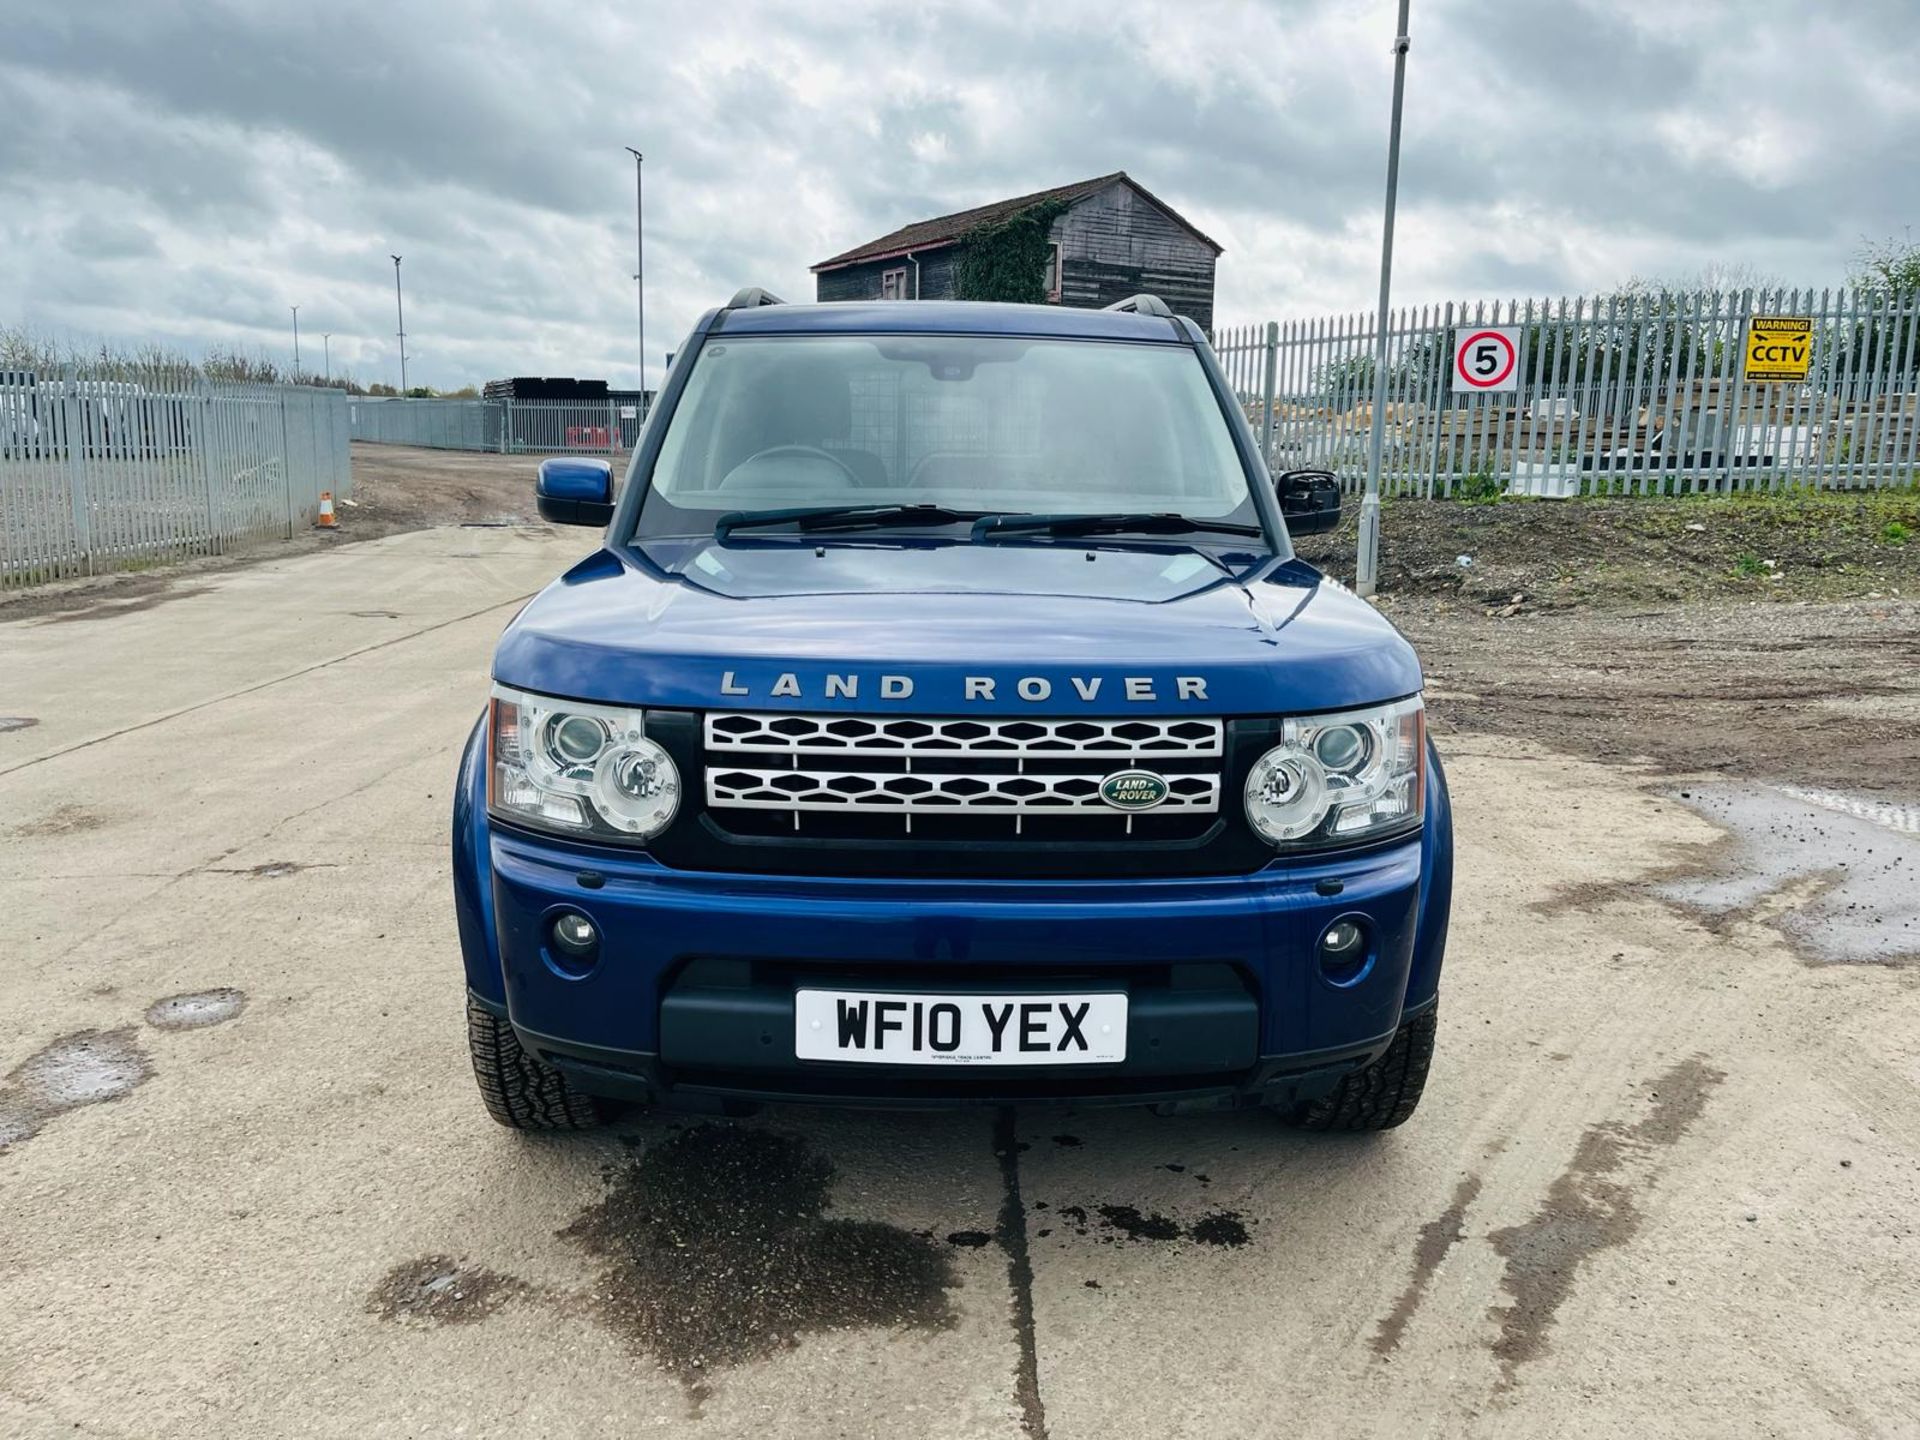 ** ON SALE ** Land Rover Discovery 4 2.7 TDV6 Commercial Van Auto -A/C-Sat Nav-Bluetooth Handsfree - Image 2 of 31